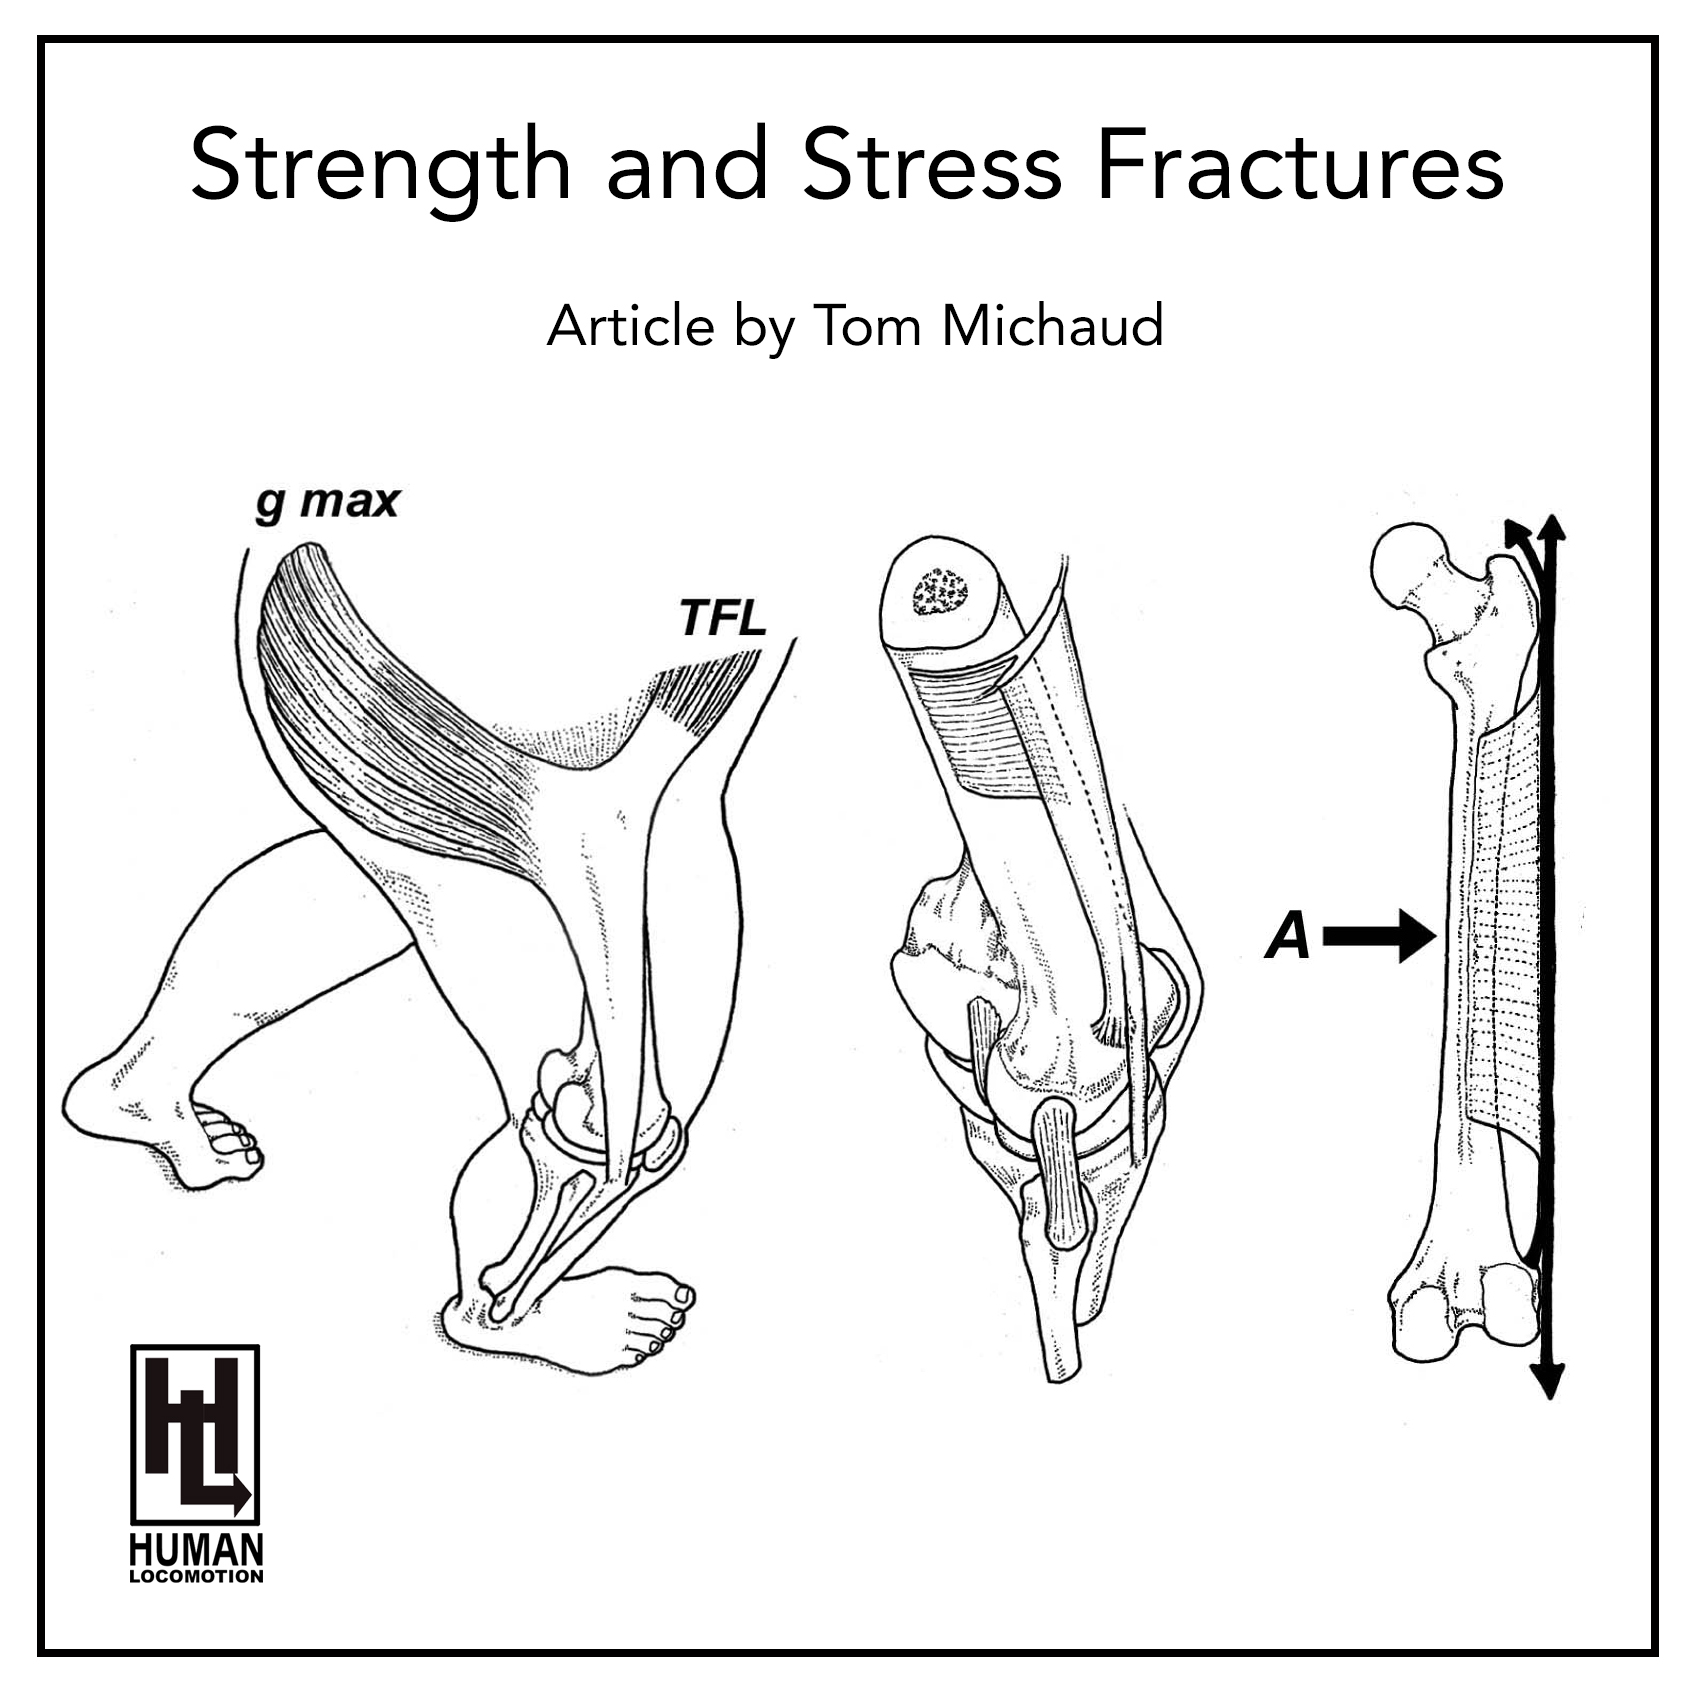 Strength and Stress Fractures